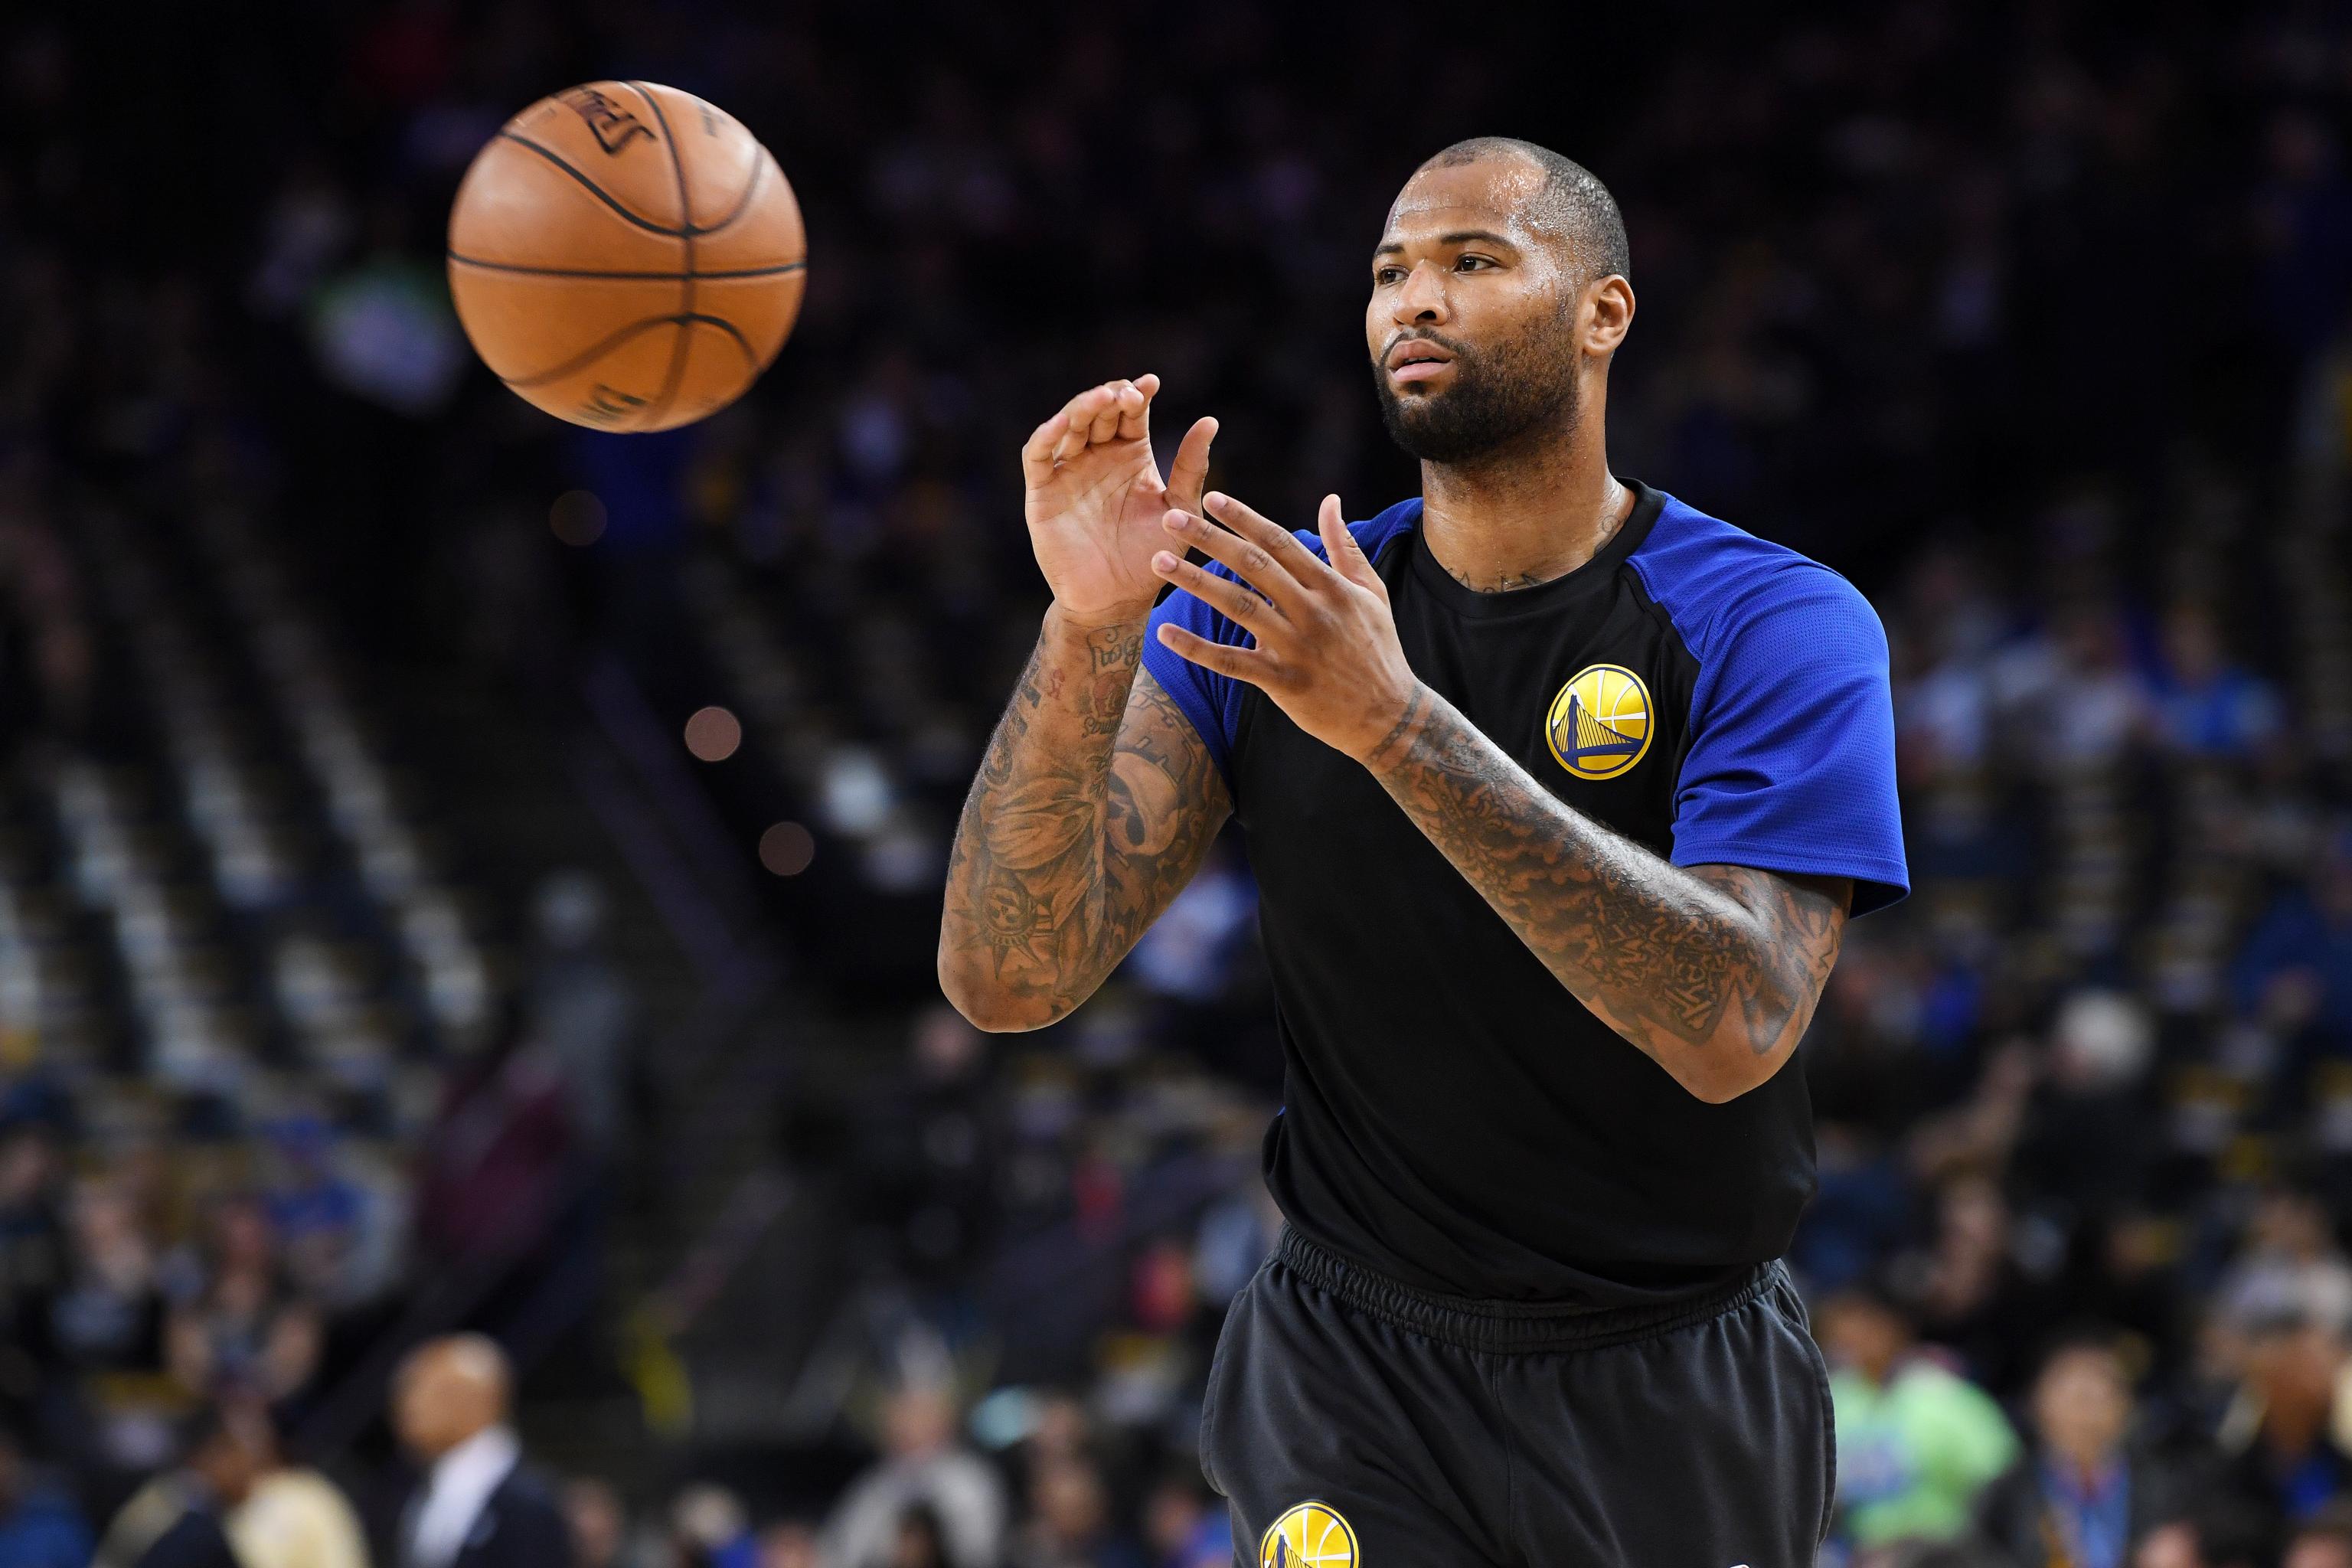 DeMarcus Cousins is just what the Warriors need to get back to